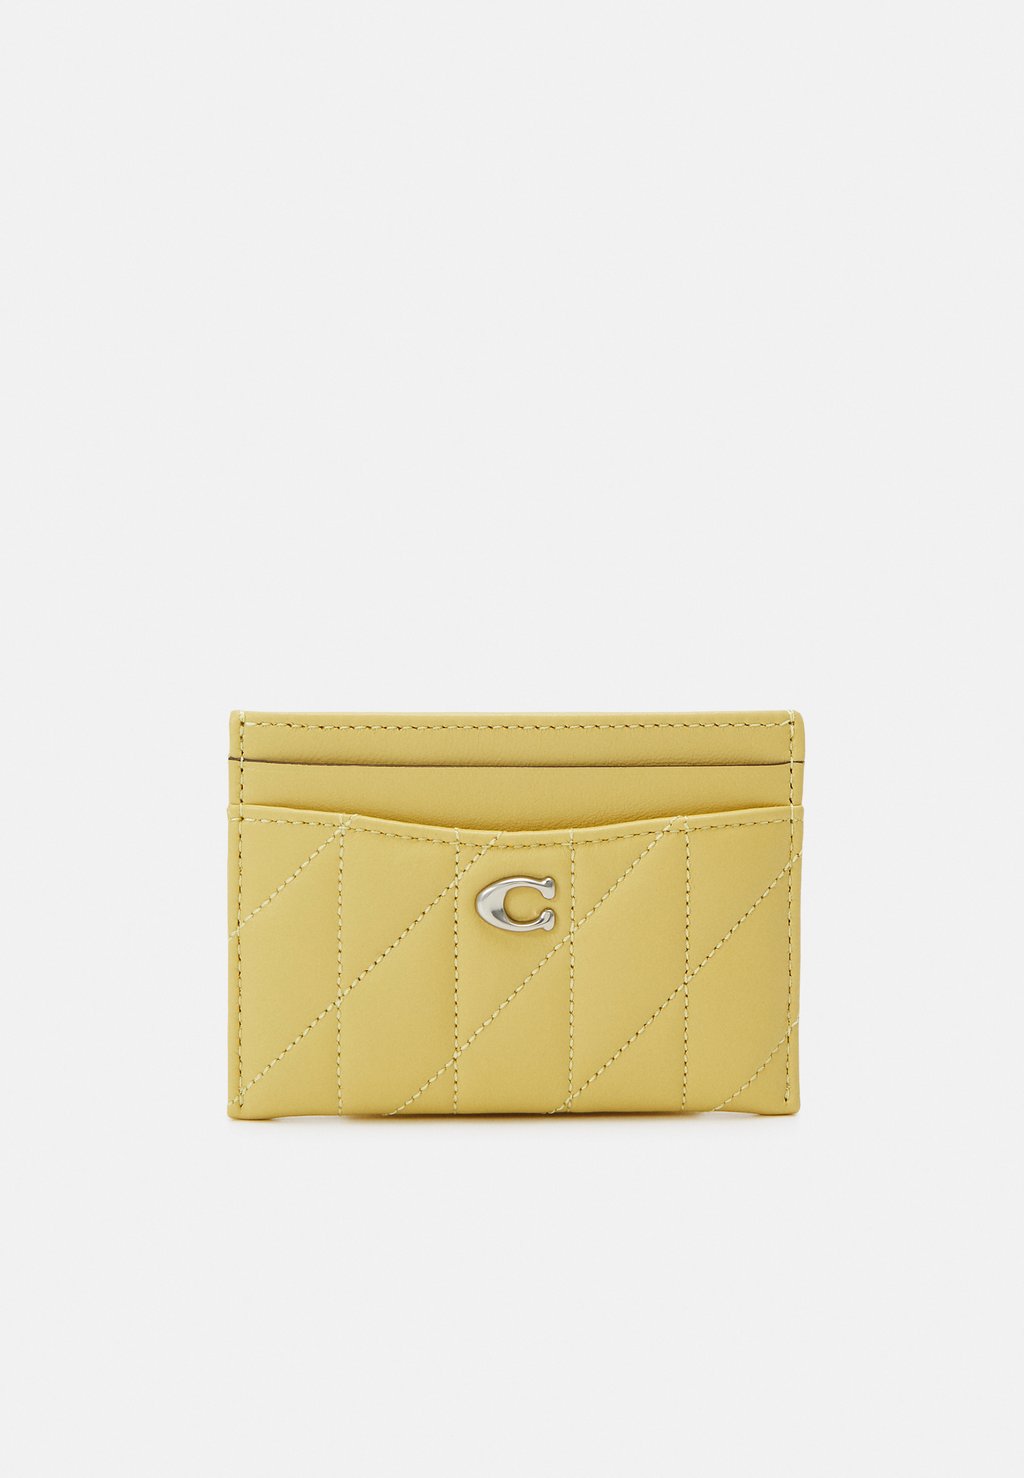 Кошелек ESSENTIAL QUILTED PILLOW CARD CASE Coach, цвет light yellow